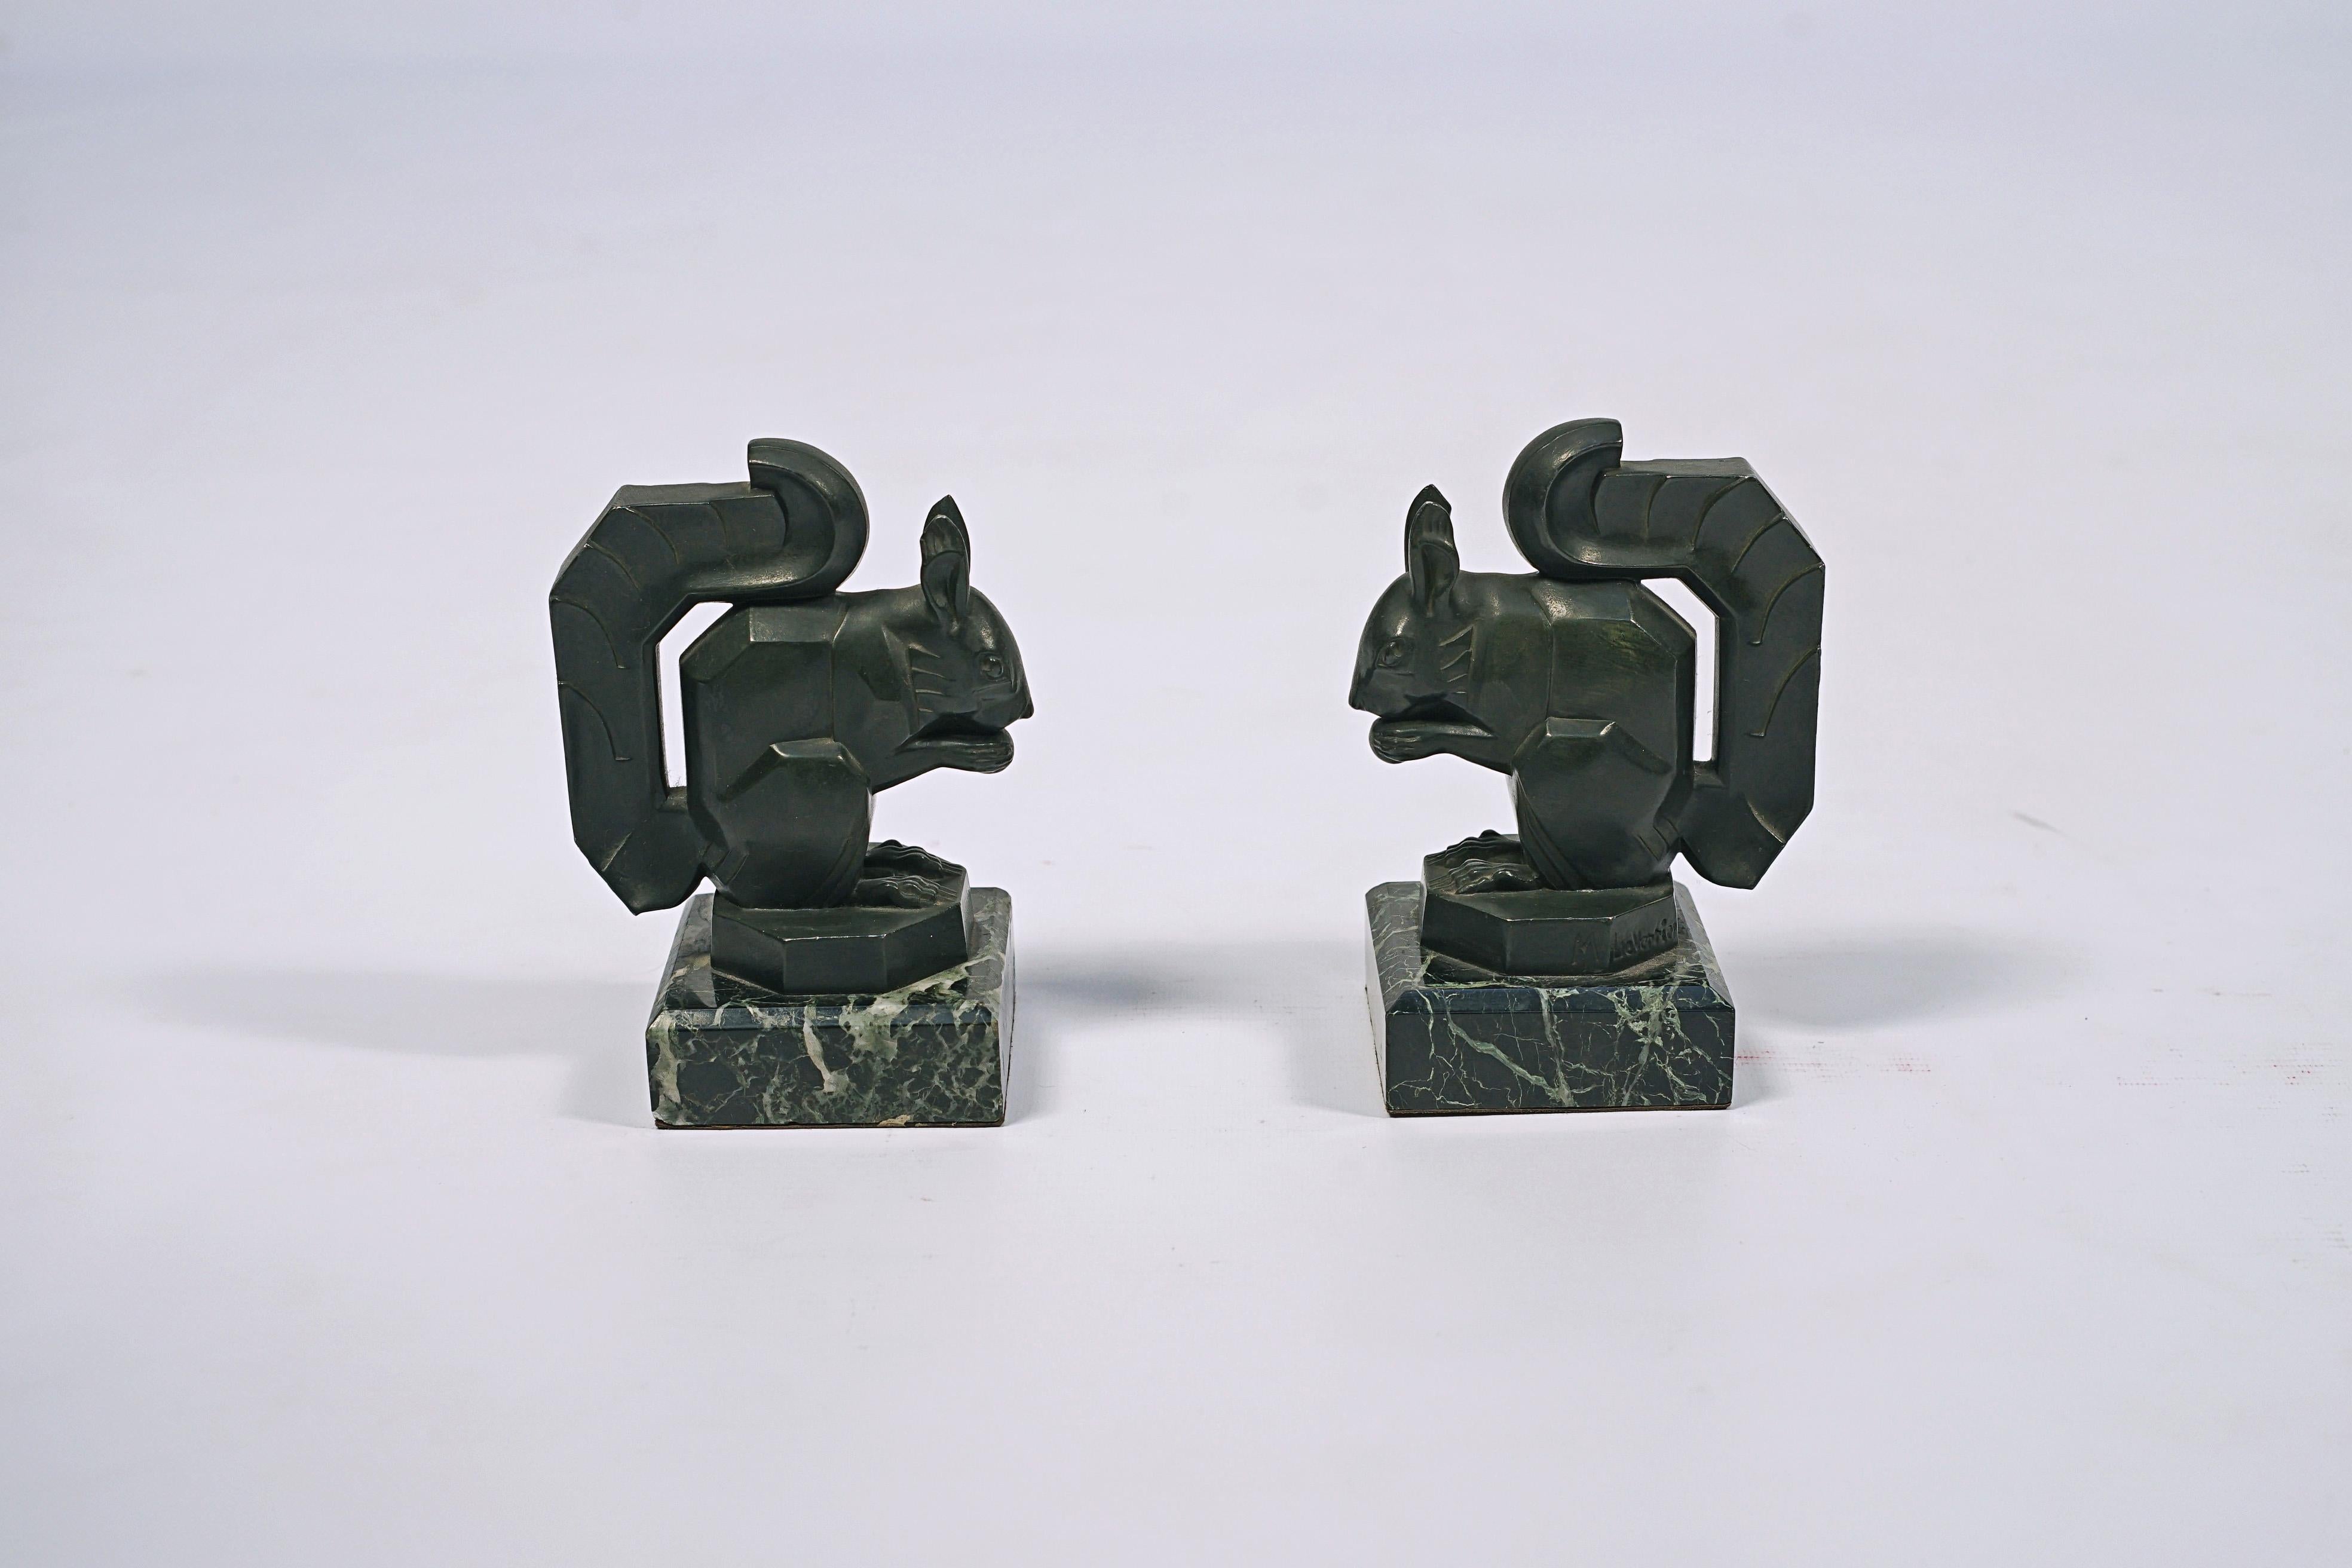 Pair of squirrel book presses model N° 453, made of bronze with green patina and with a green marble base. Made by Max Le Verrier (1891- 1973). Signed M Le Verrier.

France, CIRCA 1930.